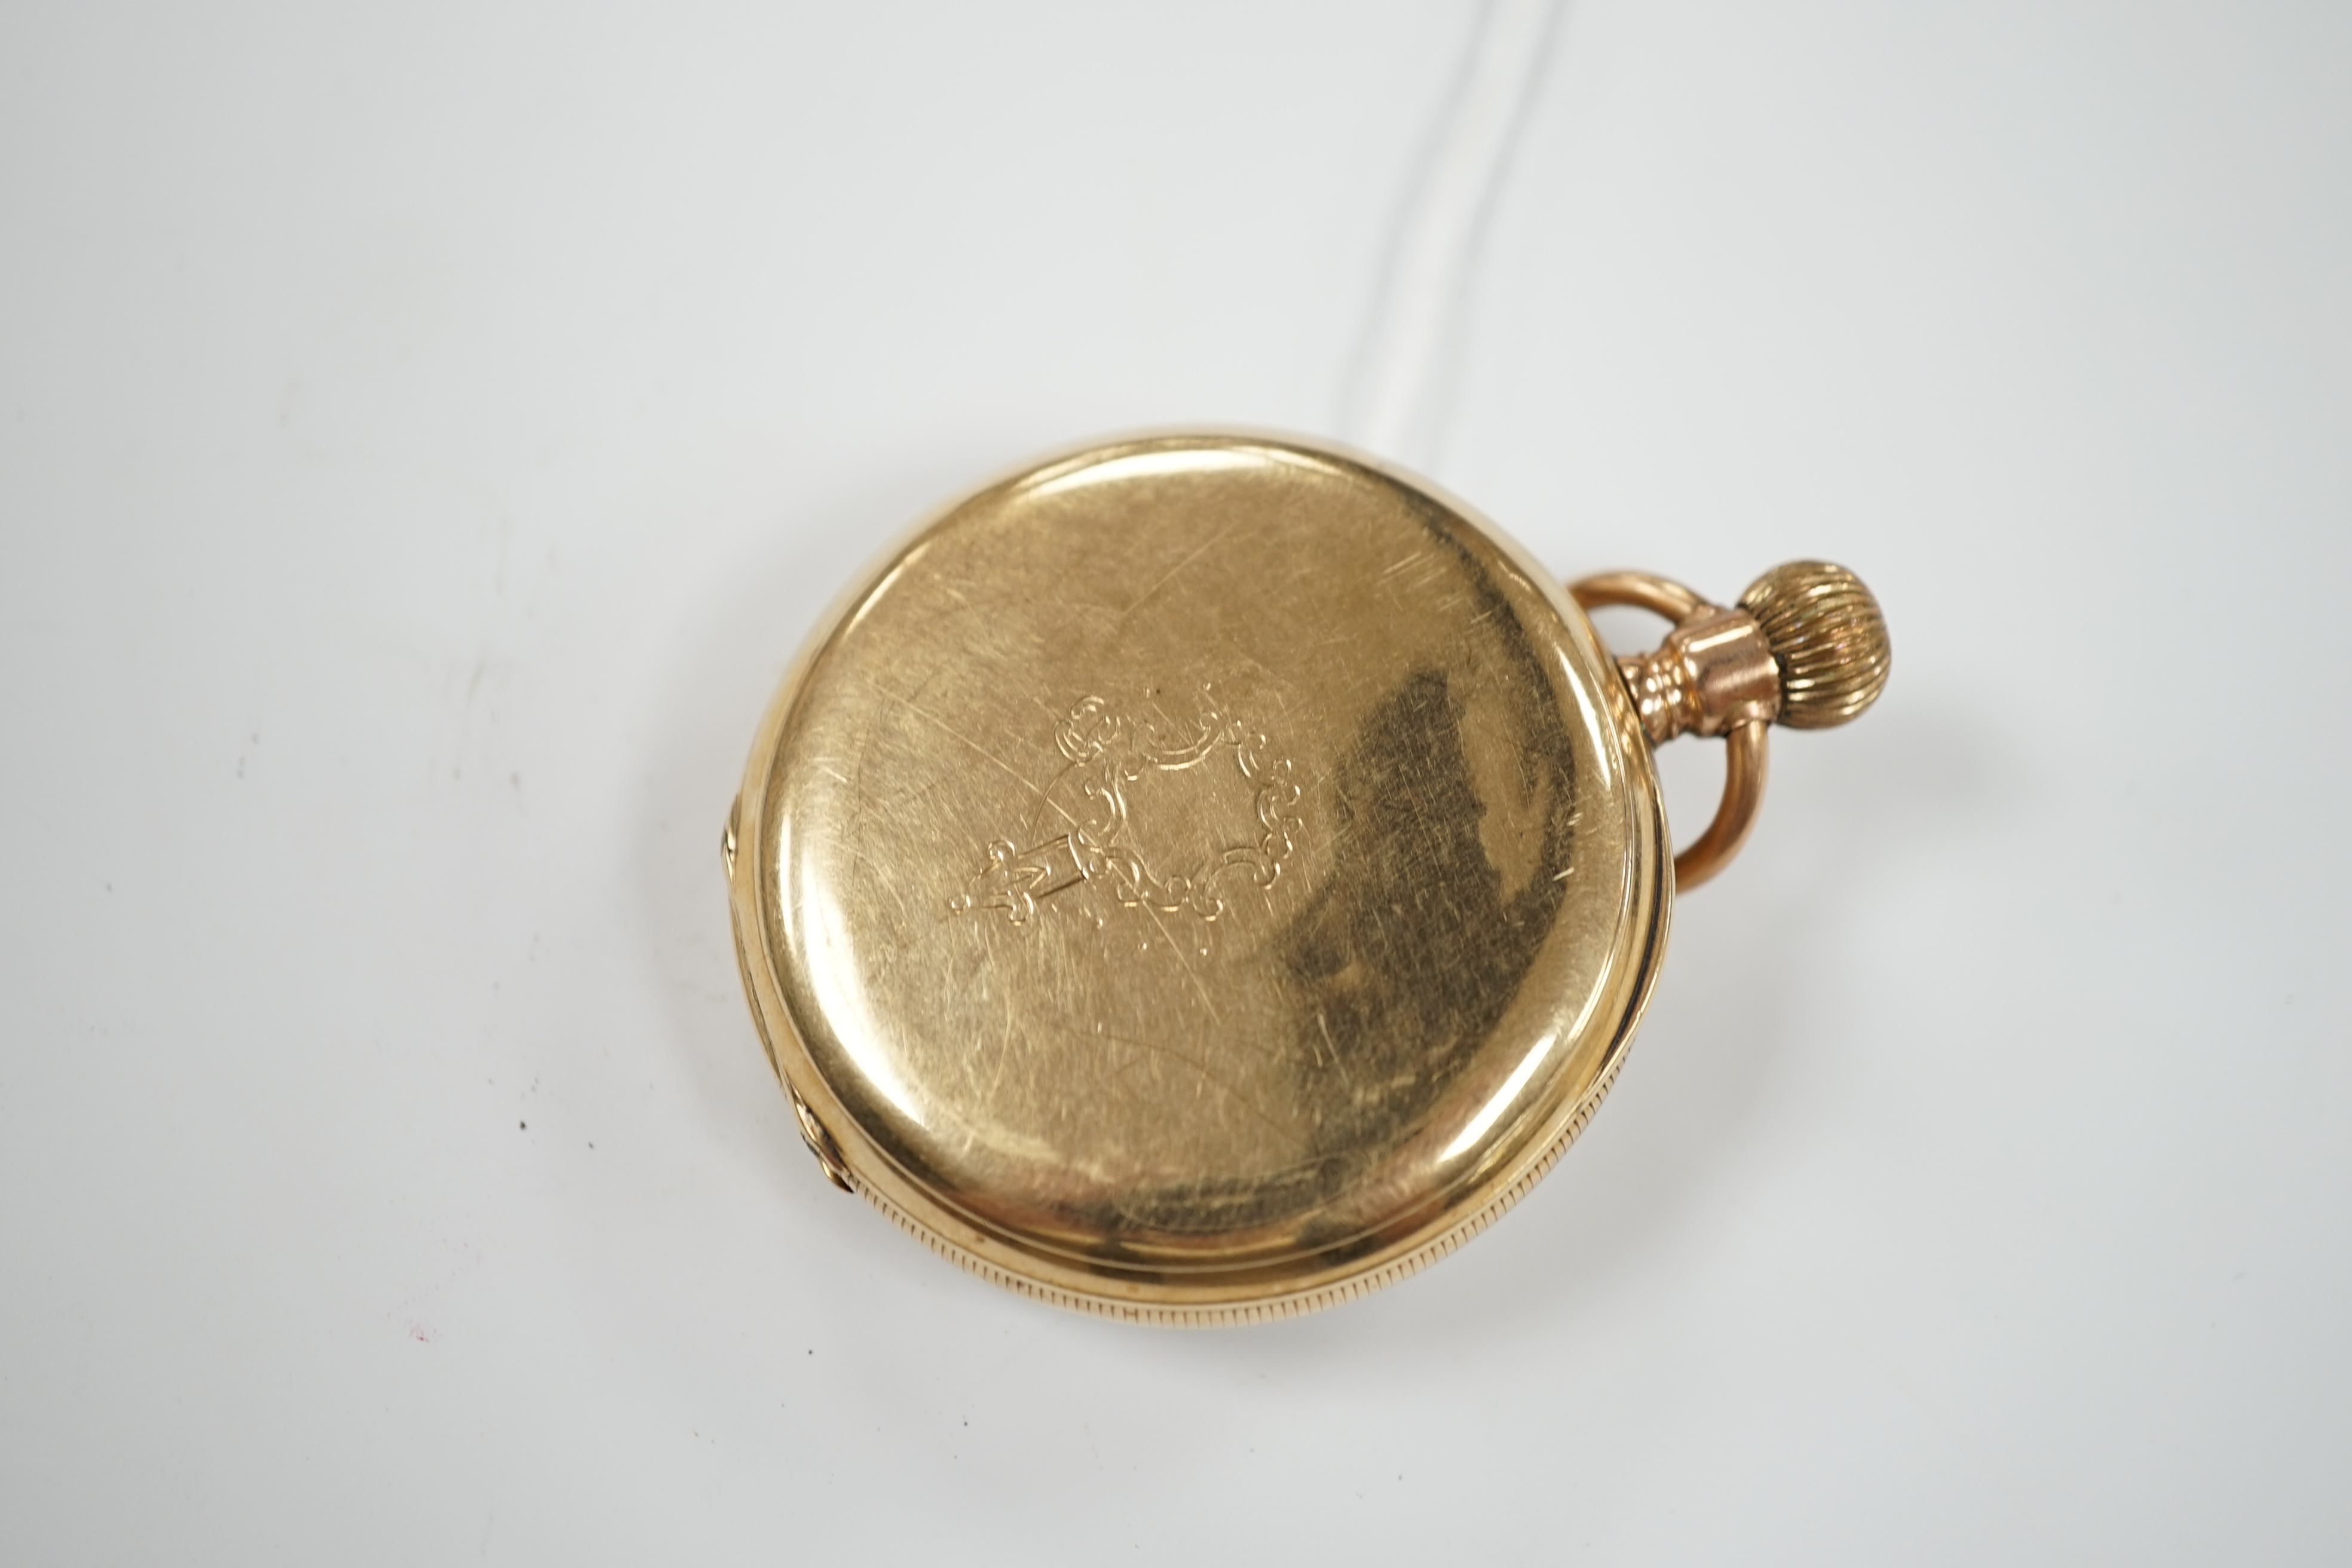 An early 20th century Waltham 9C open face keyless pocket watch, with Roman dial and subsidiary seconds, case diameter 50mm, gross weight 88.9 grams.